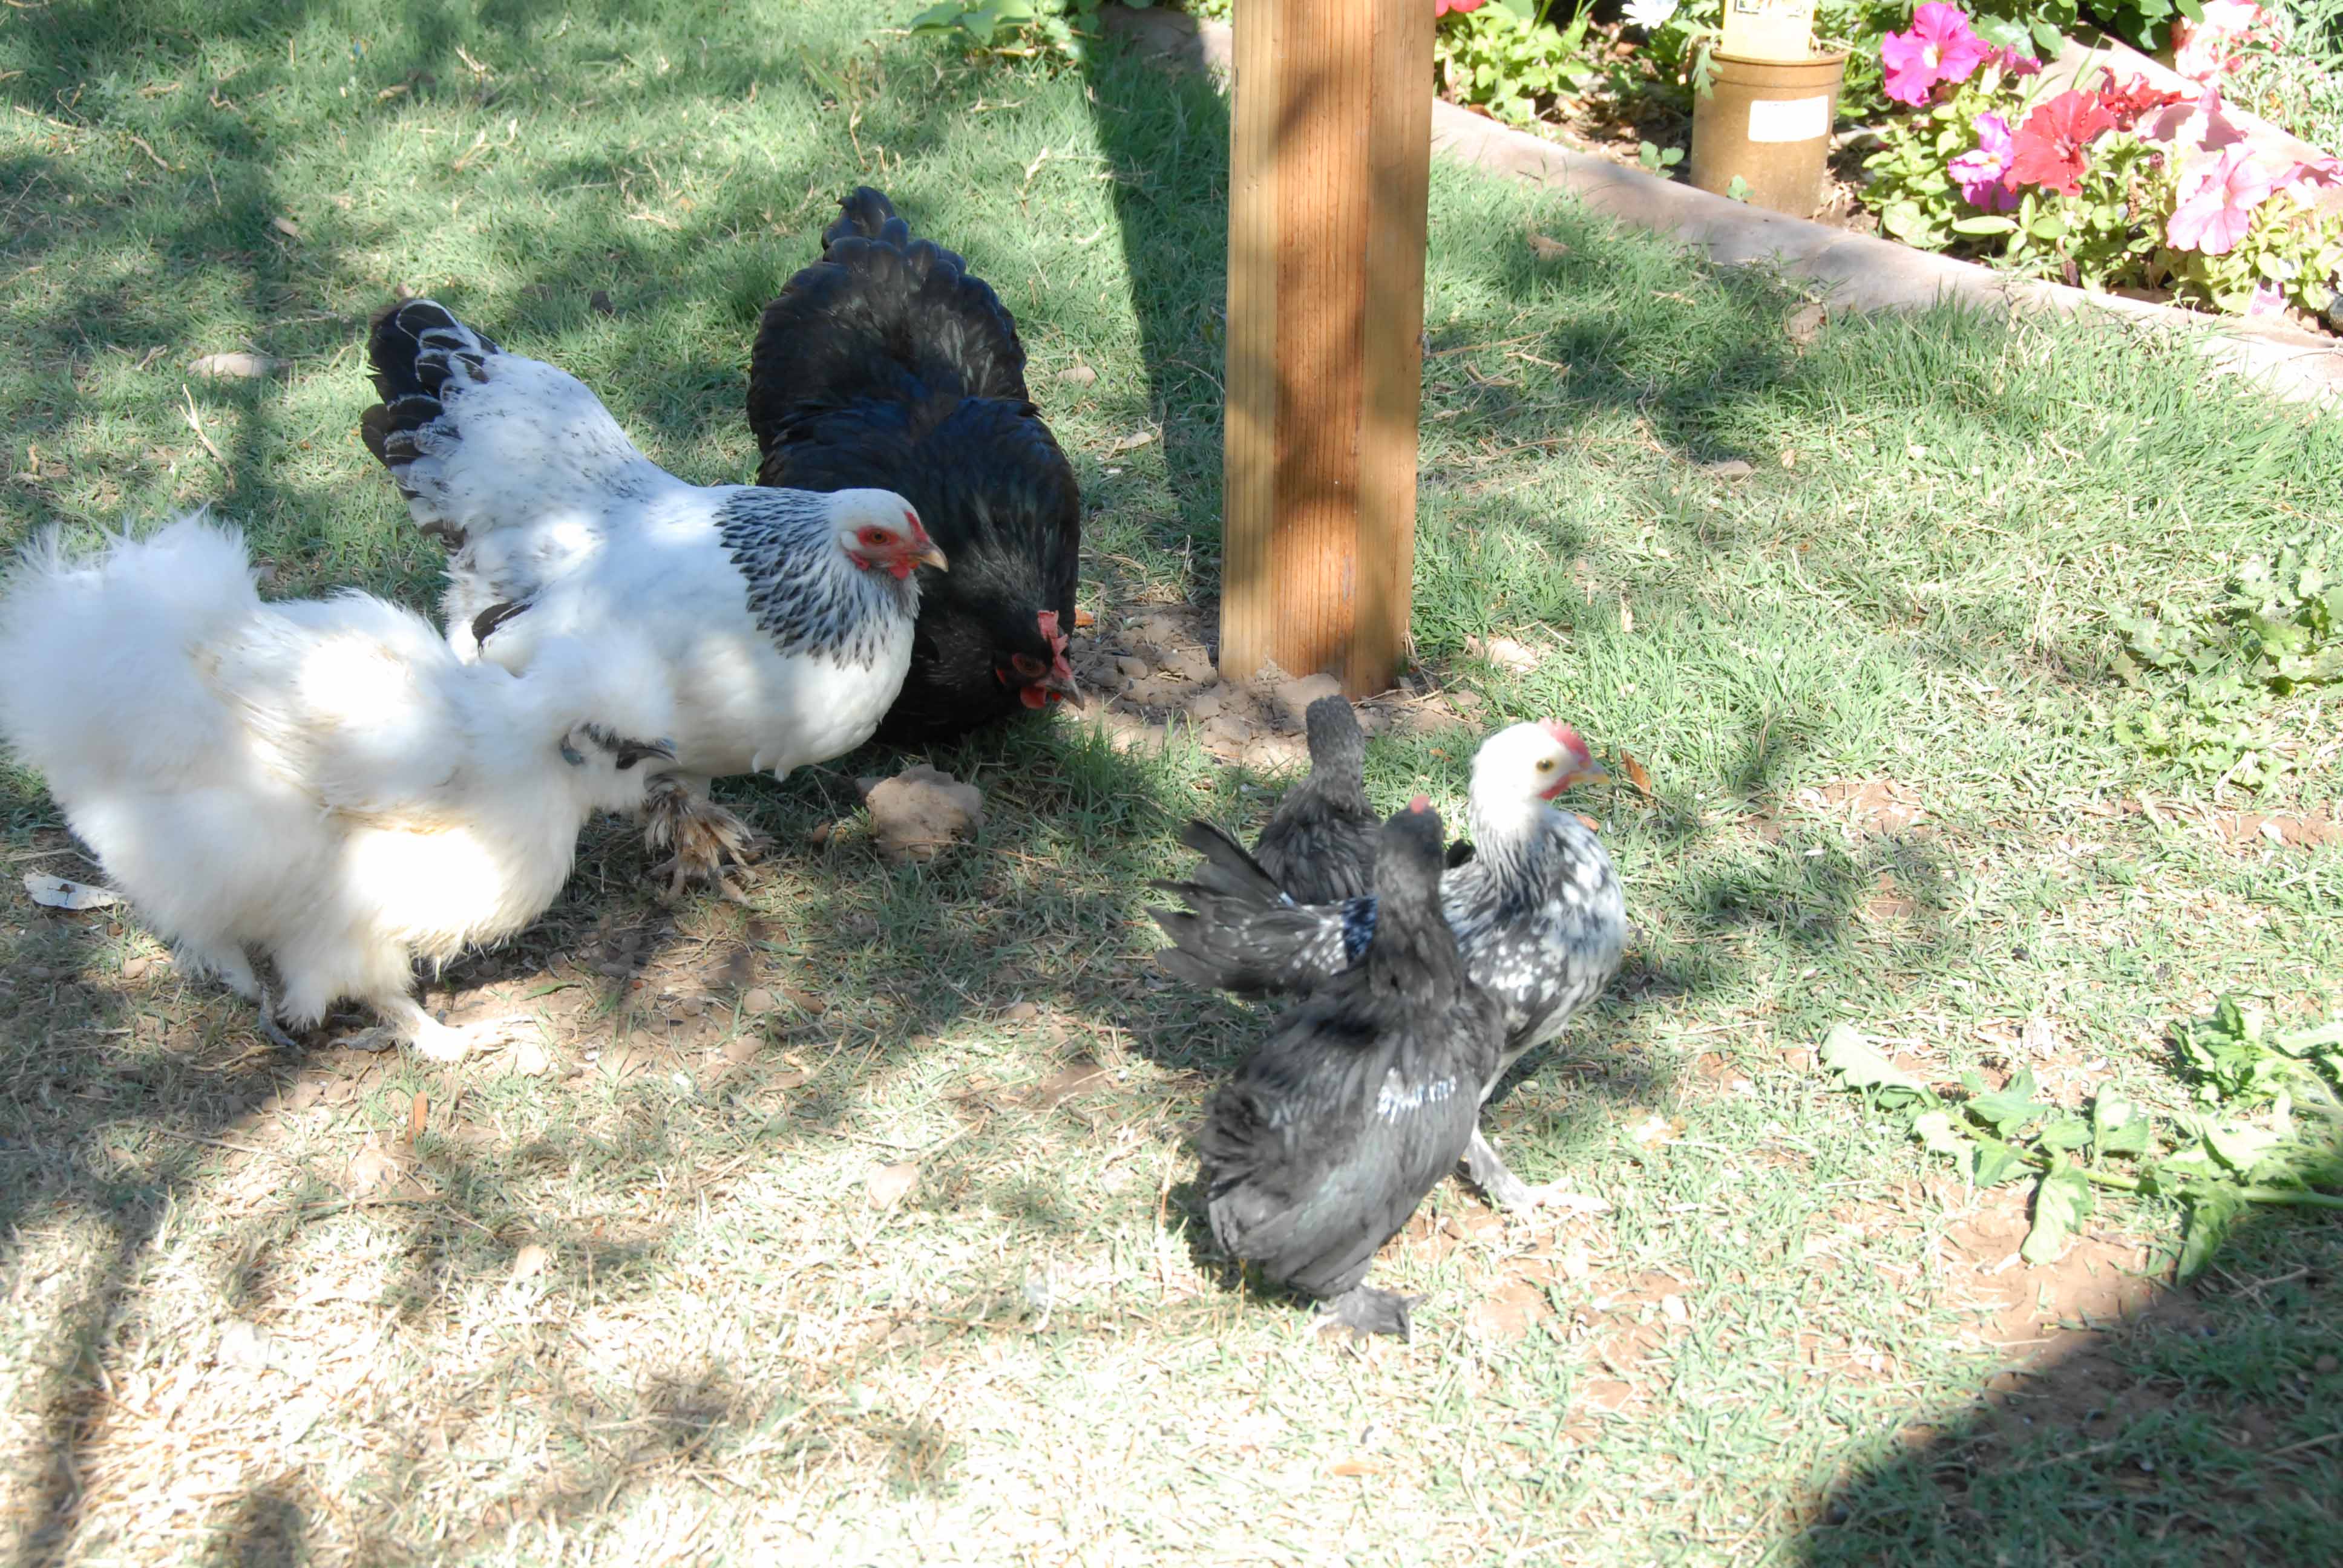 The new babies with the hens.